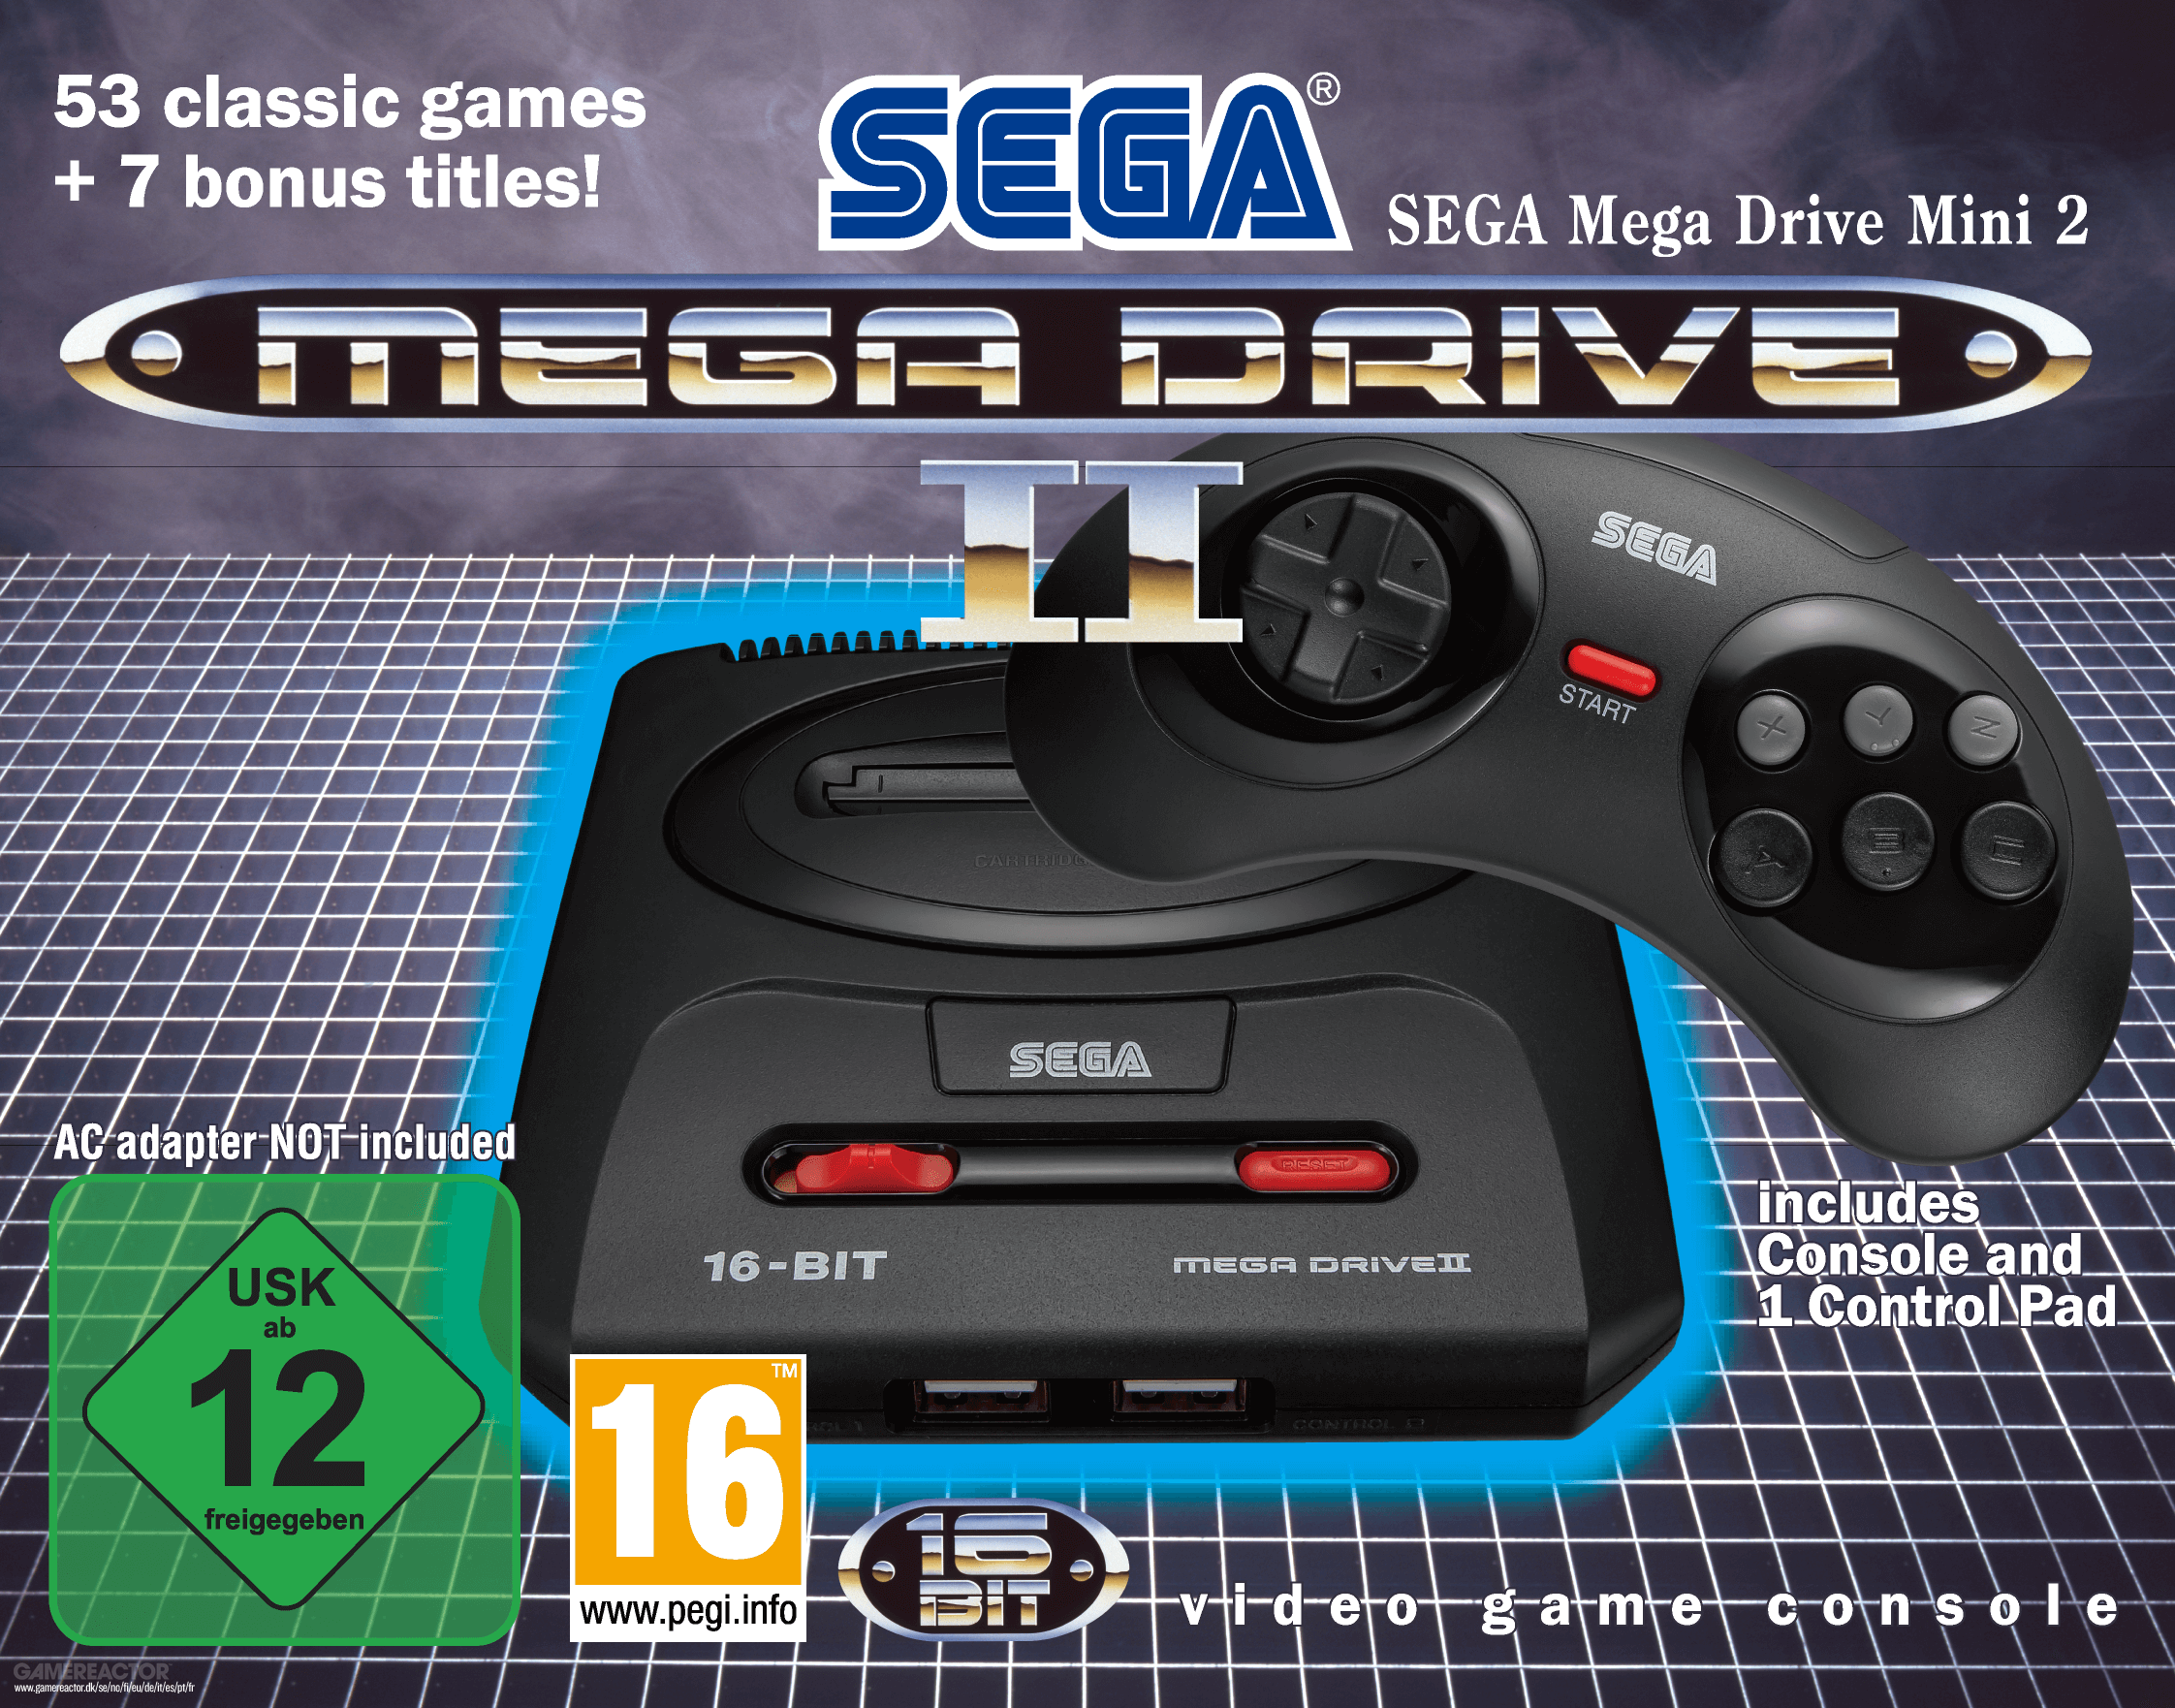 The Mega Drive Mini 2 is now available for pre-order in Europe.